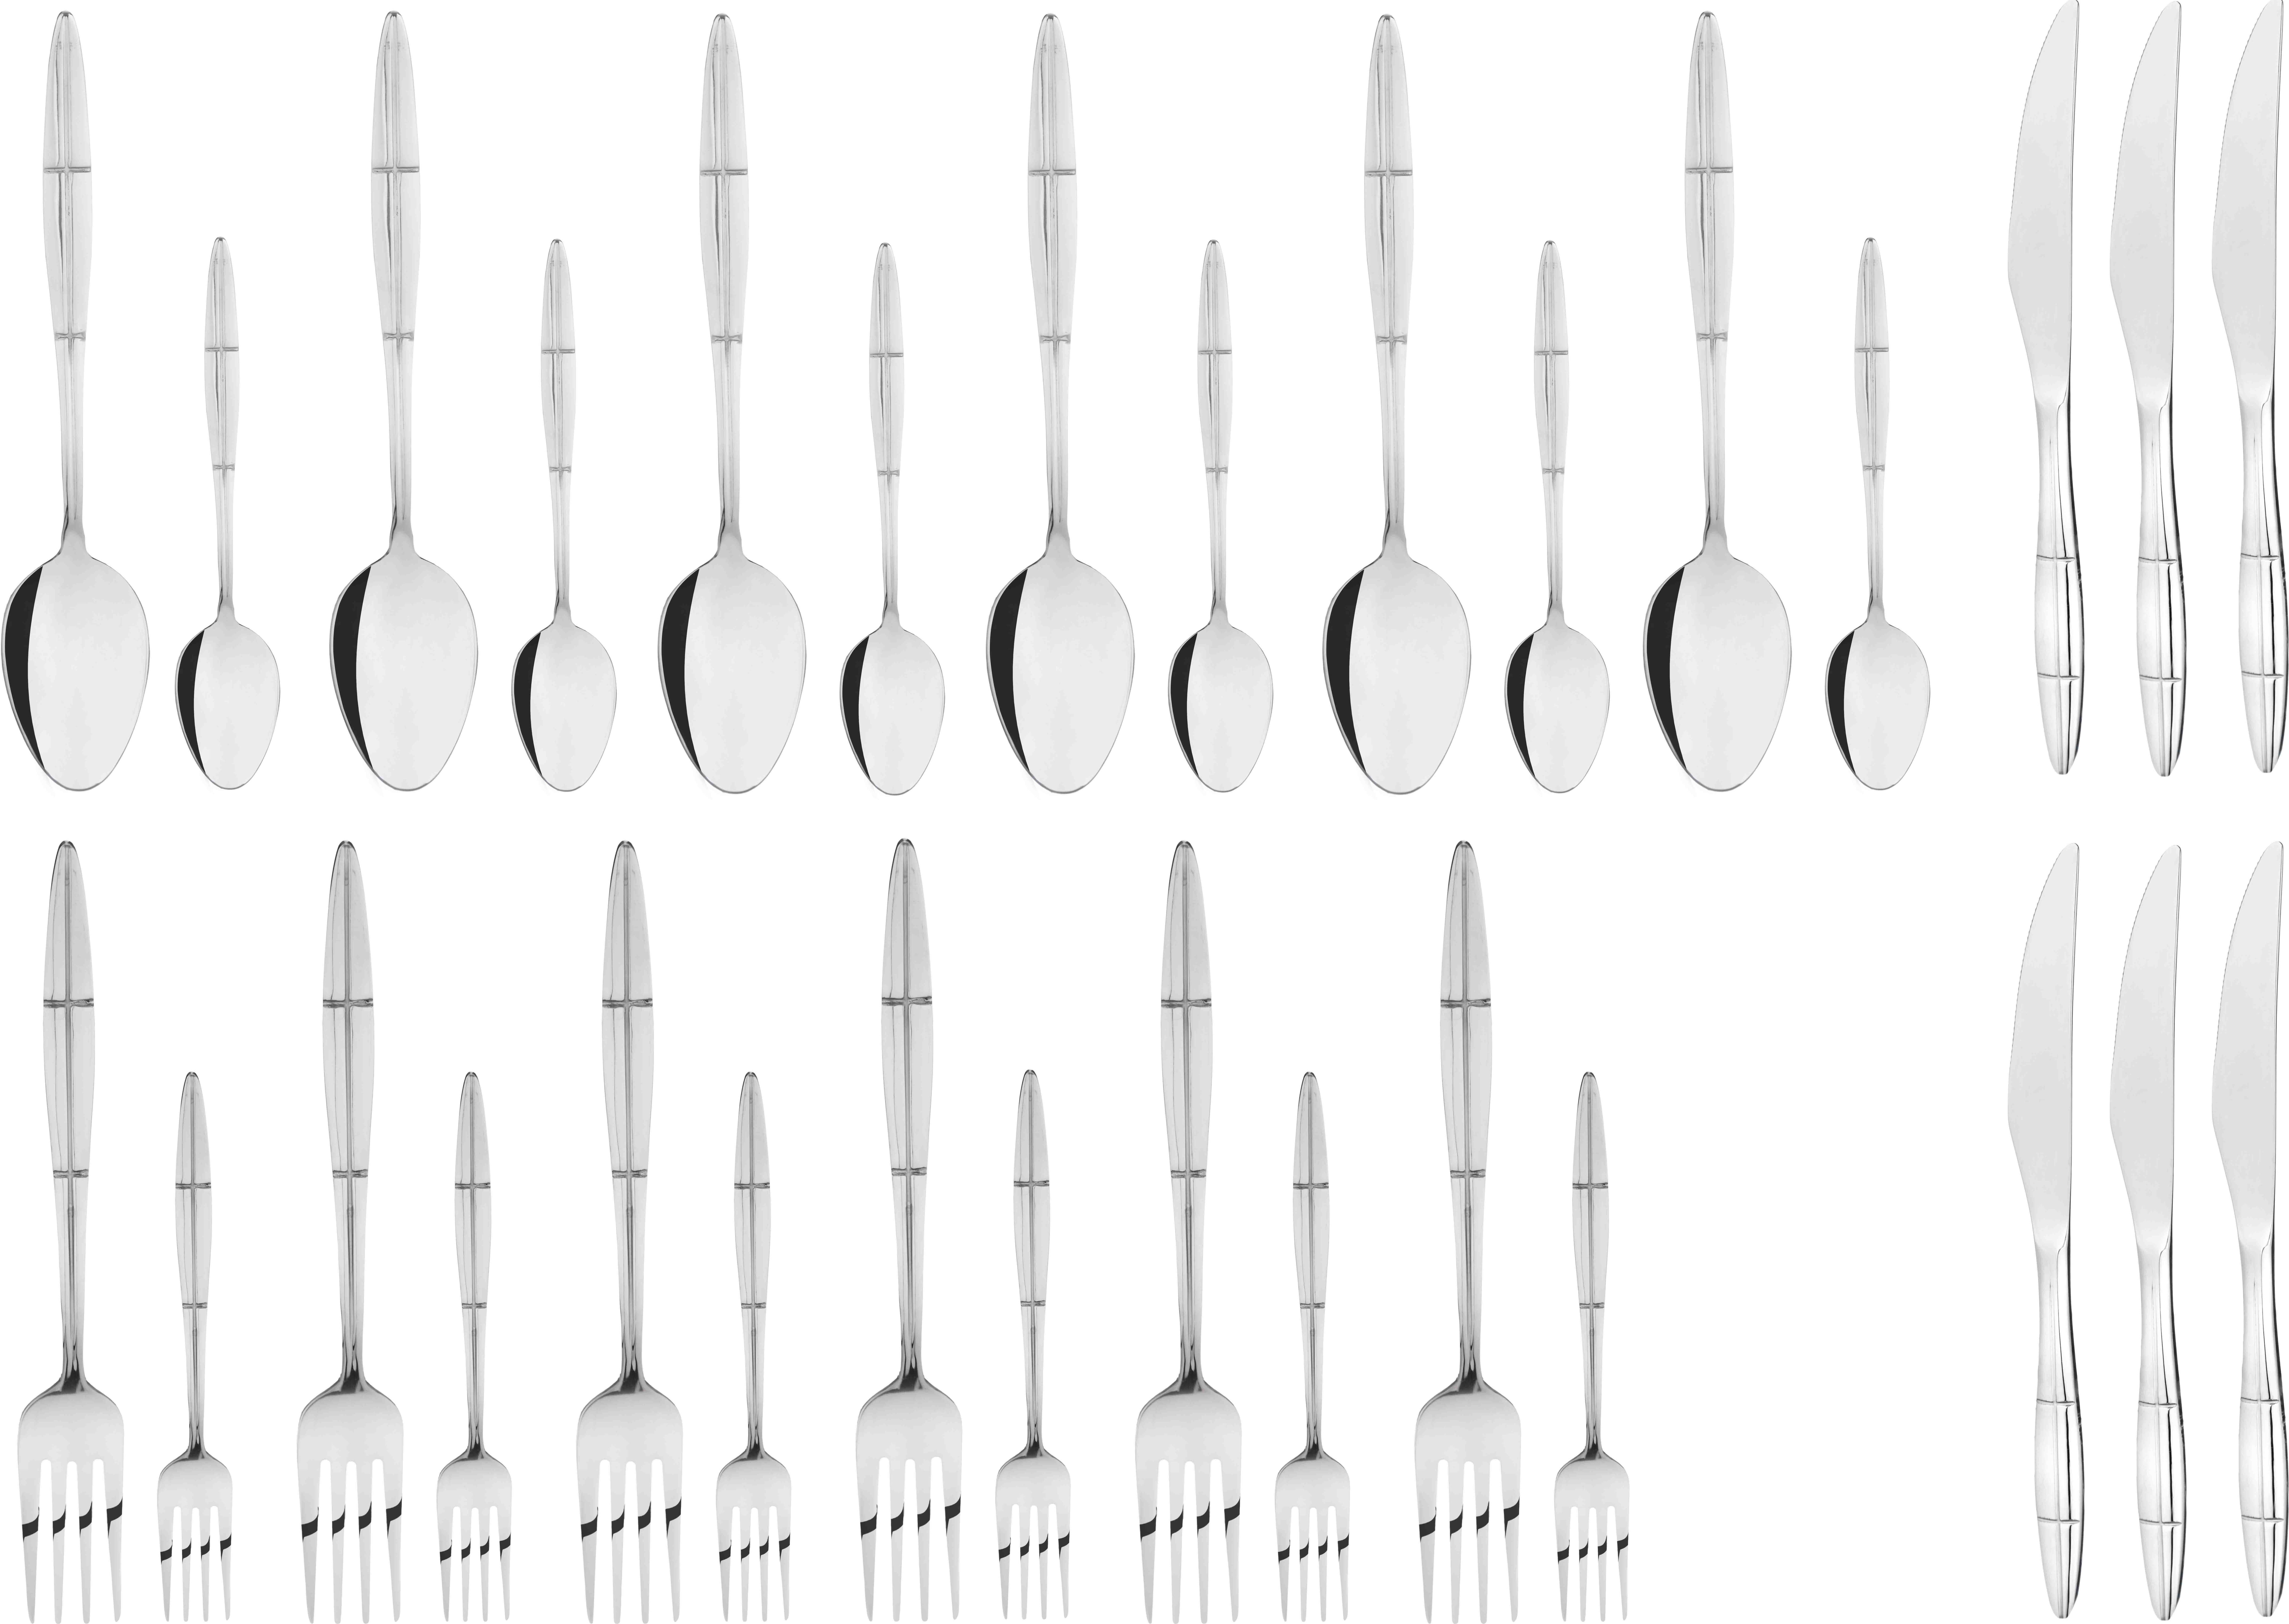 Get Nouval Stainless Steel Cutlery Set, 30 Pieces - Silver with best offers | Raneen.com